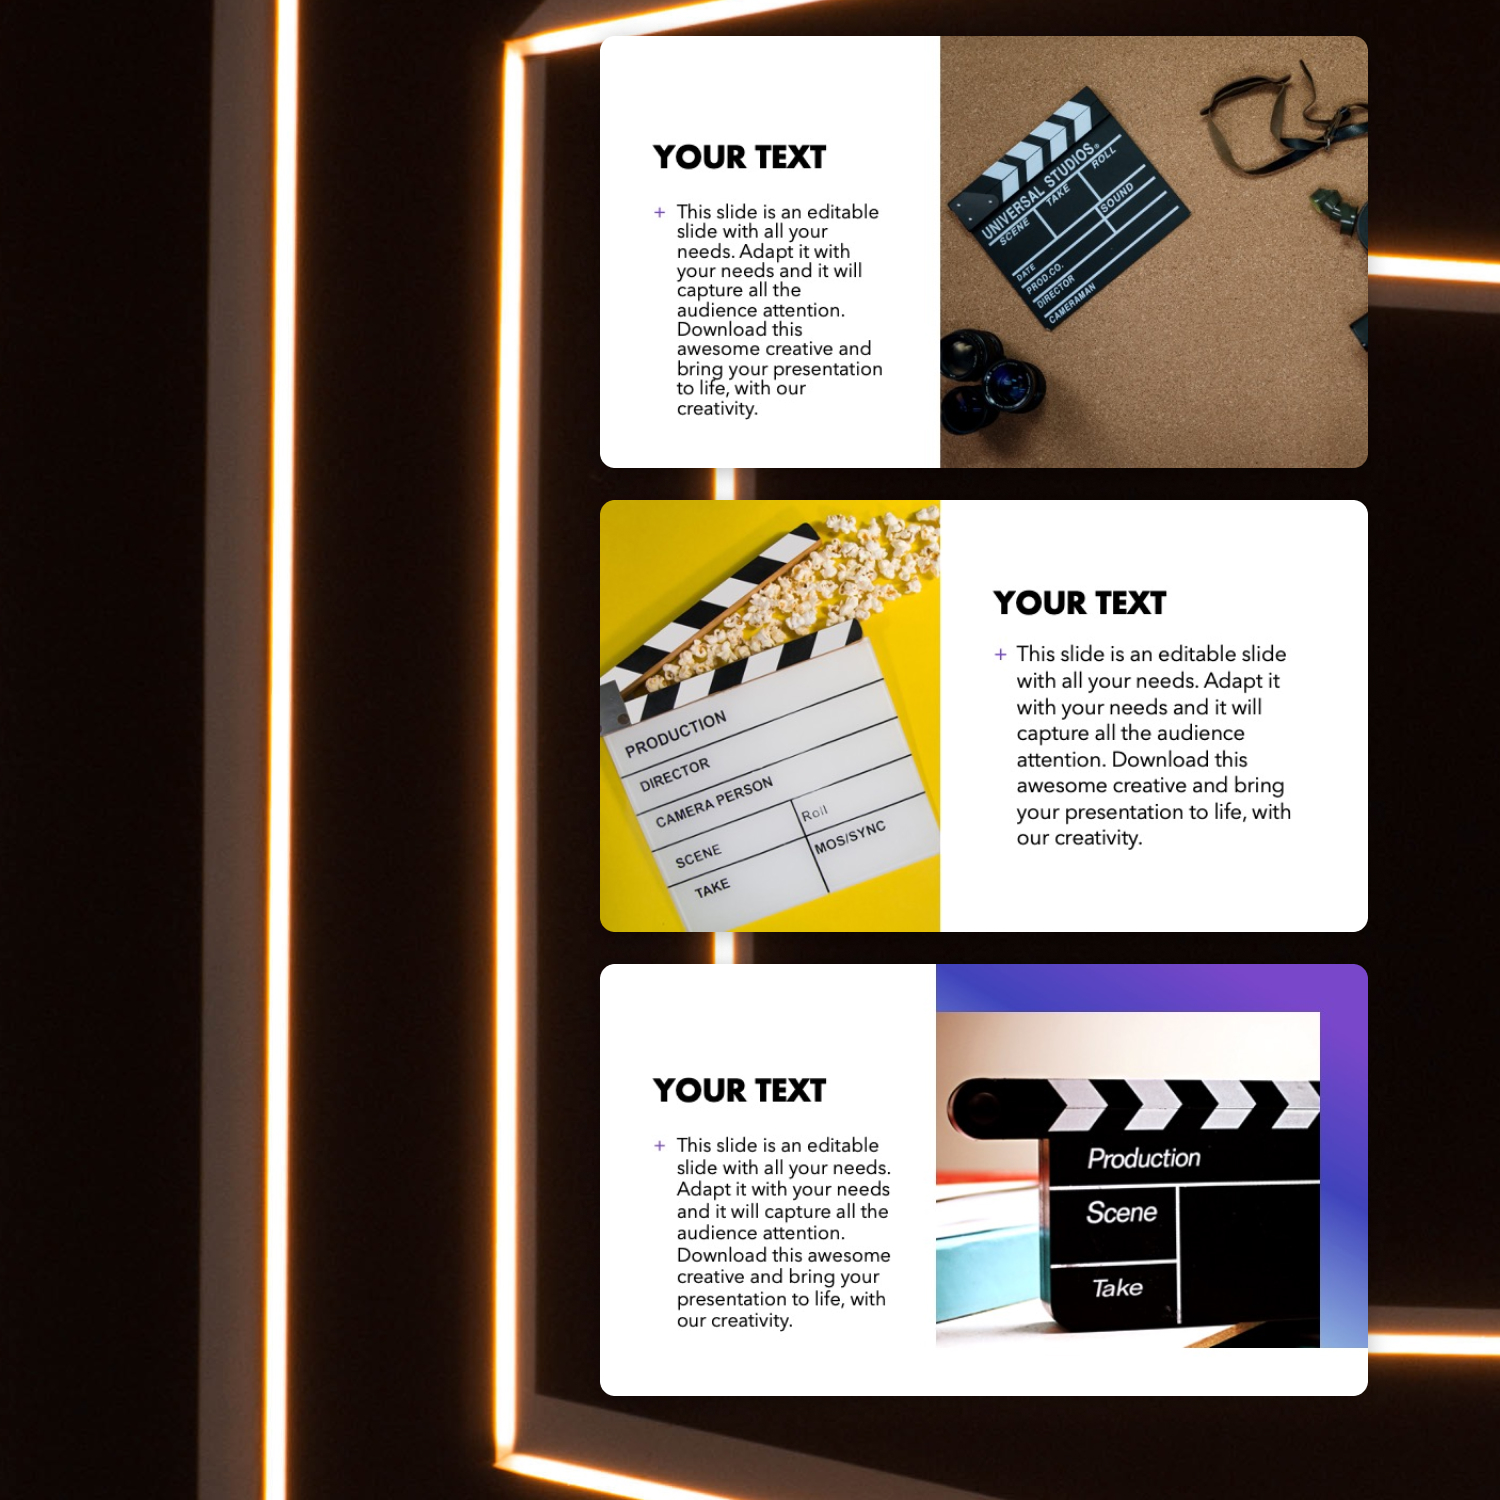 Preview movie themed powerpoint.